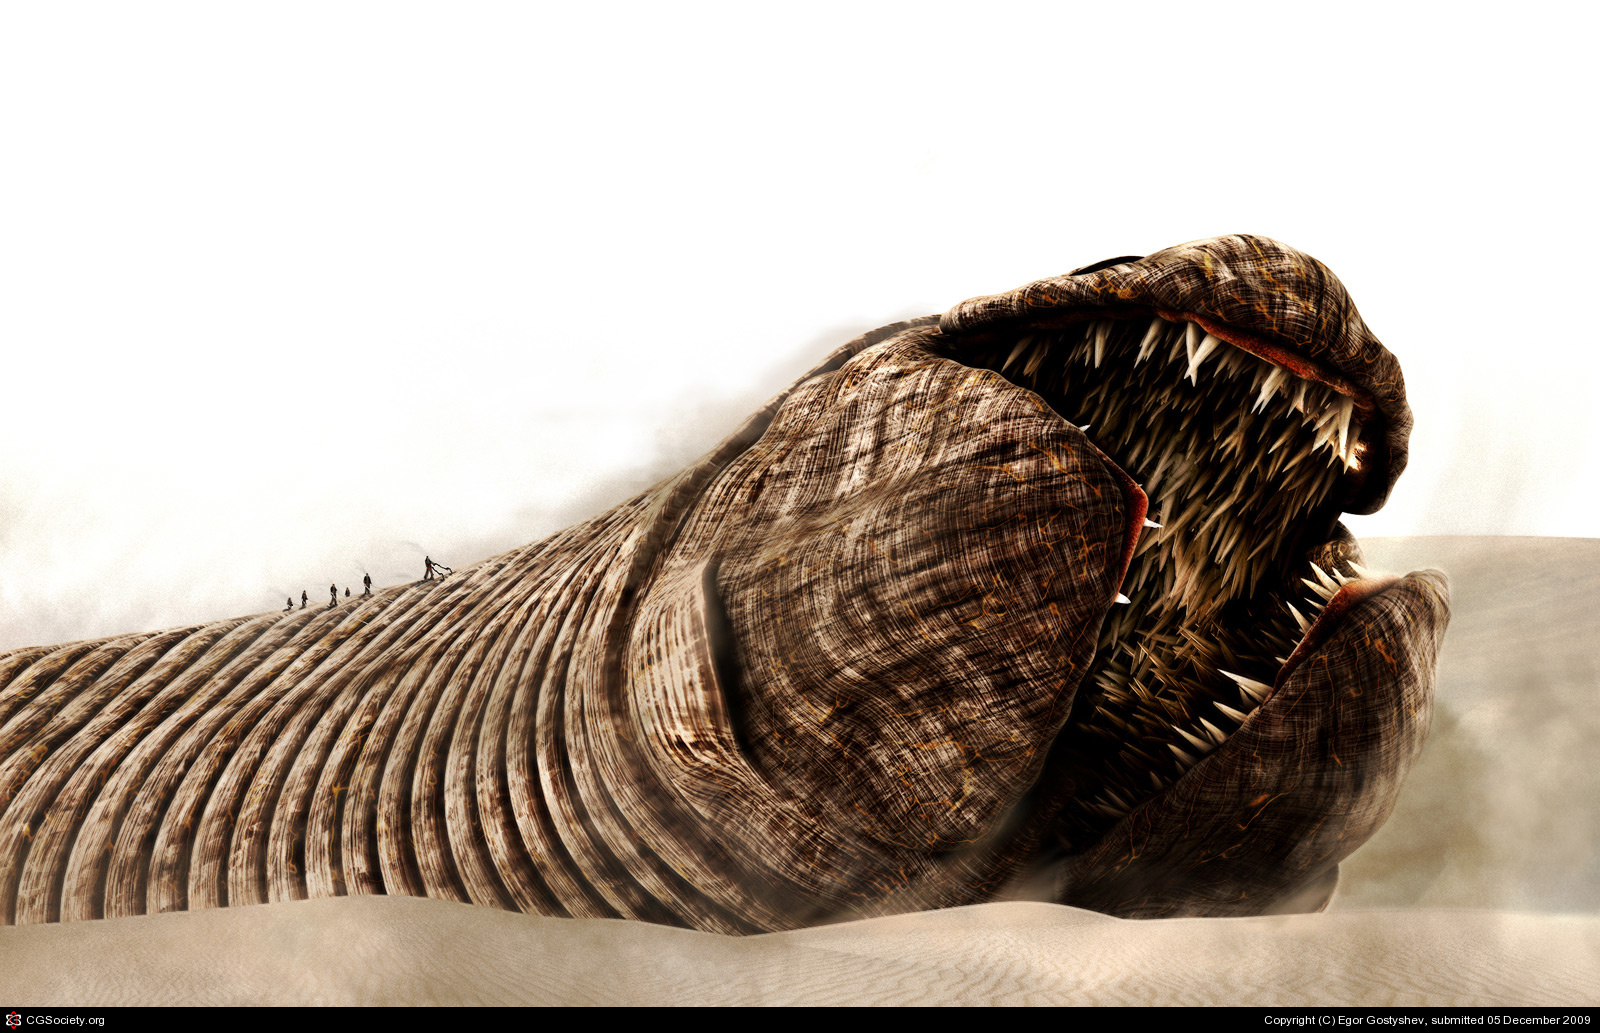 Sandworms Attacking Kingdom coloring, Download Sandworms Attacking